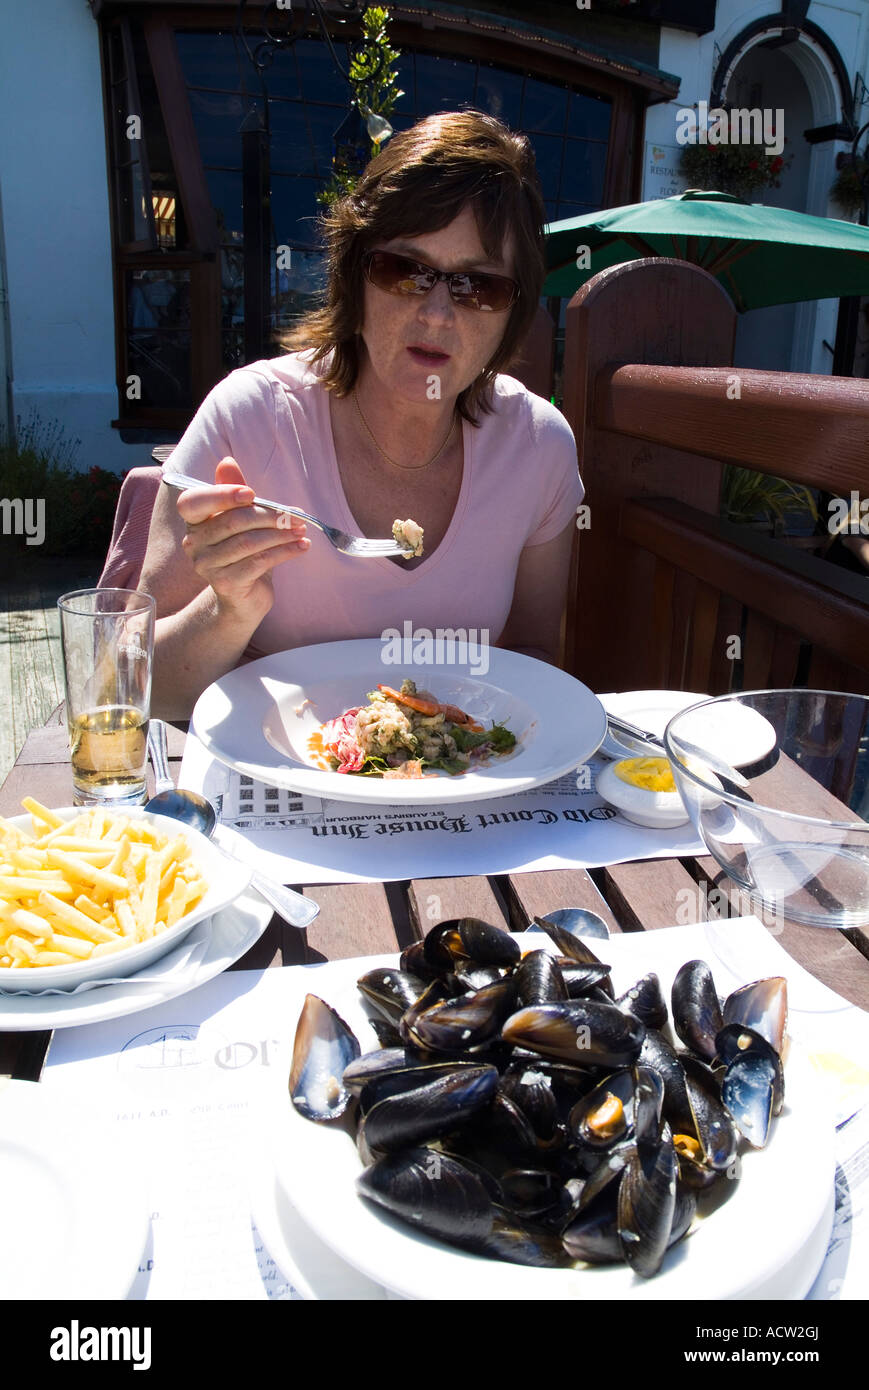 dh Old Court House Inn ST AUBINS JERSEY Dinner woman eating seafood mussels al fresco lunch restaurant channel island tourist outdoors table plate Stock Photo